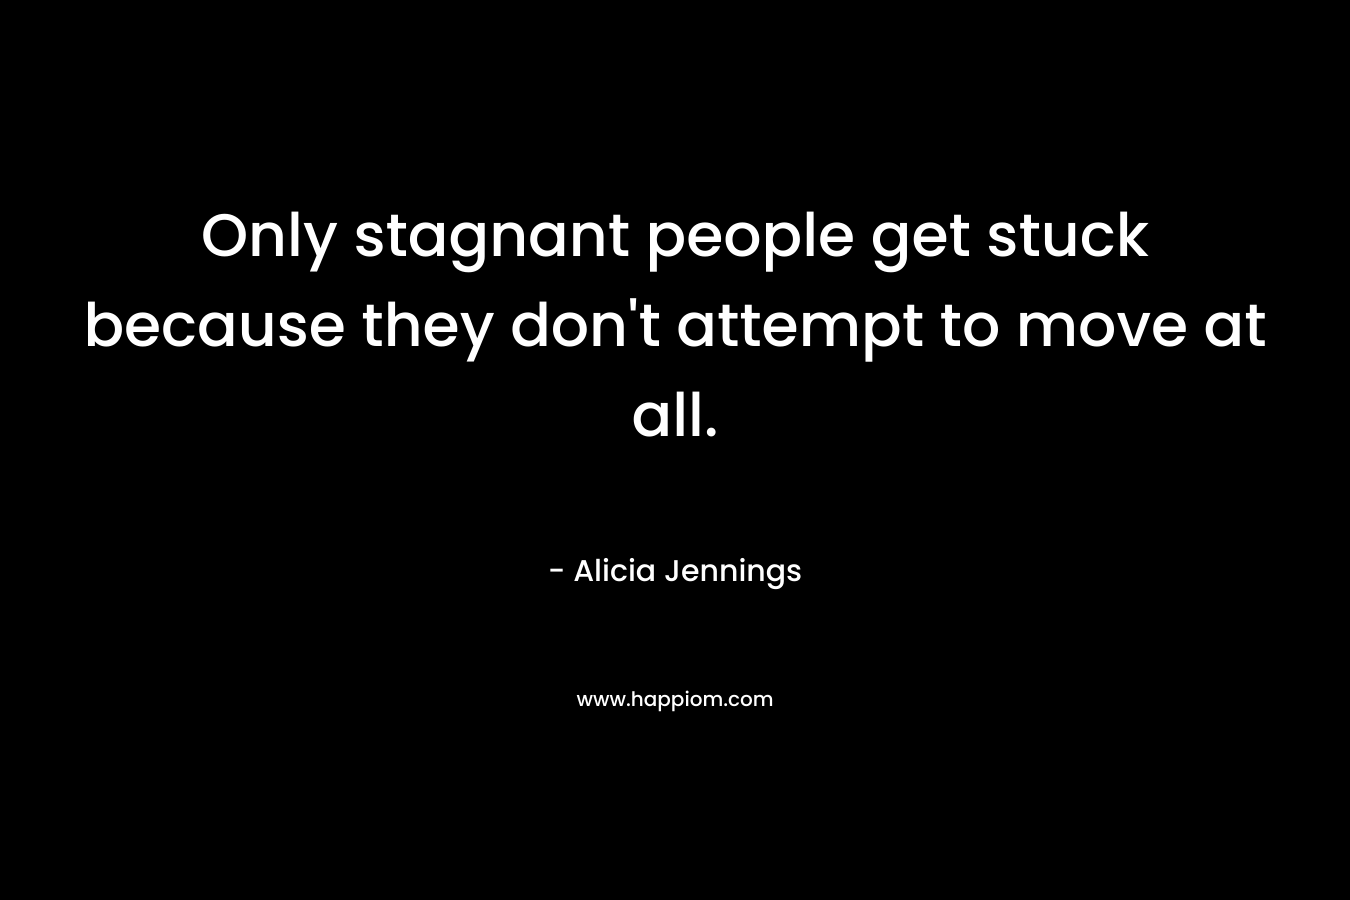 Only stagnant people get stuck because they don't attempt to move at all.